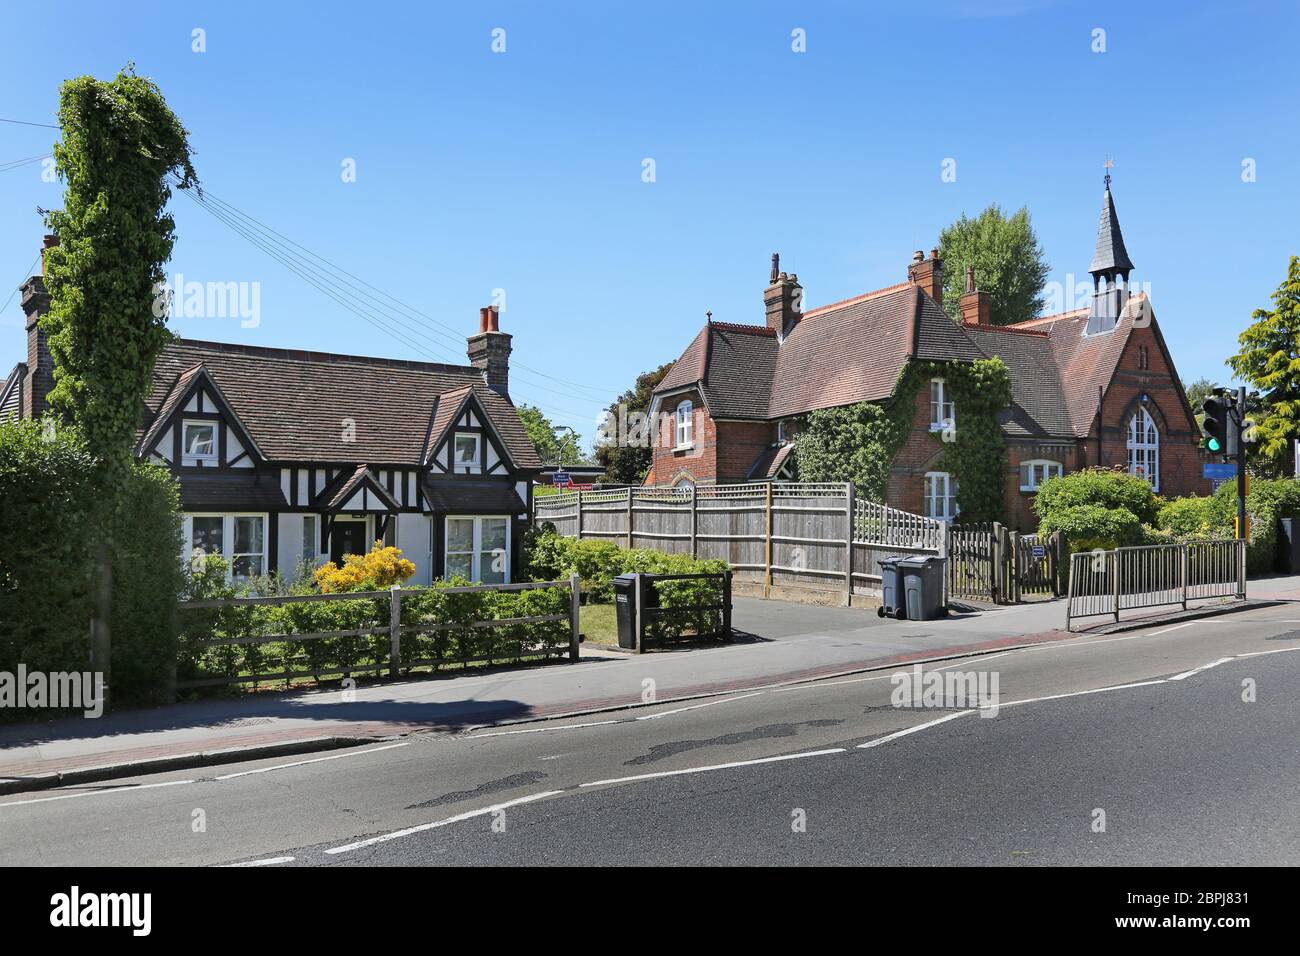 A traditional Englisg timber cottage stands next to the Victorian school bulding of Gresham Primary School in the village of Sanderstead, Surrey. Stock Photo